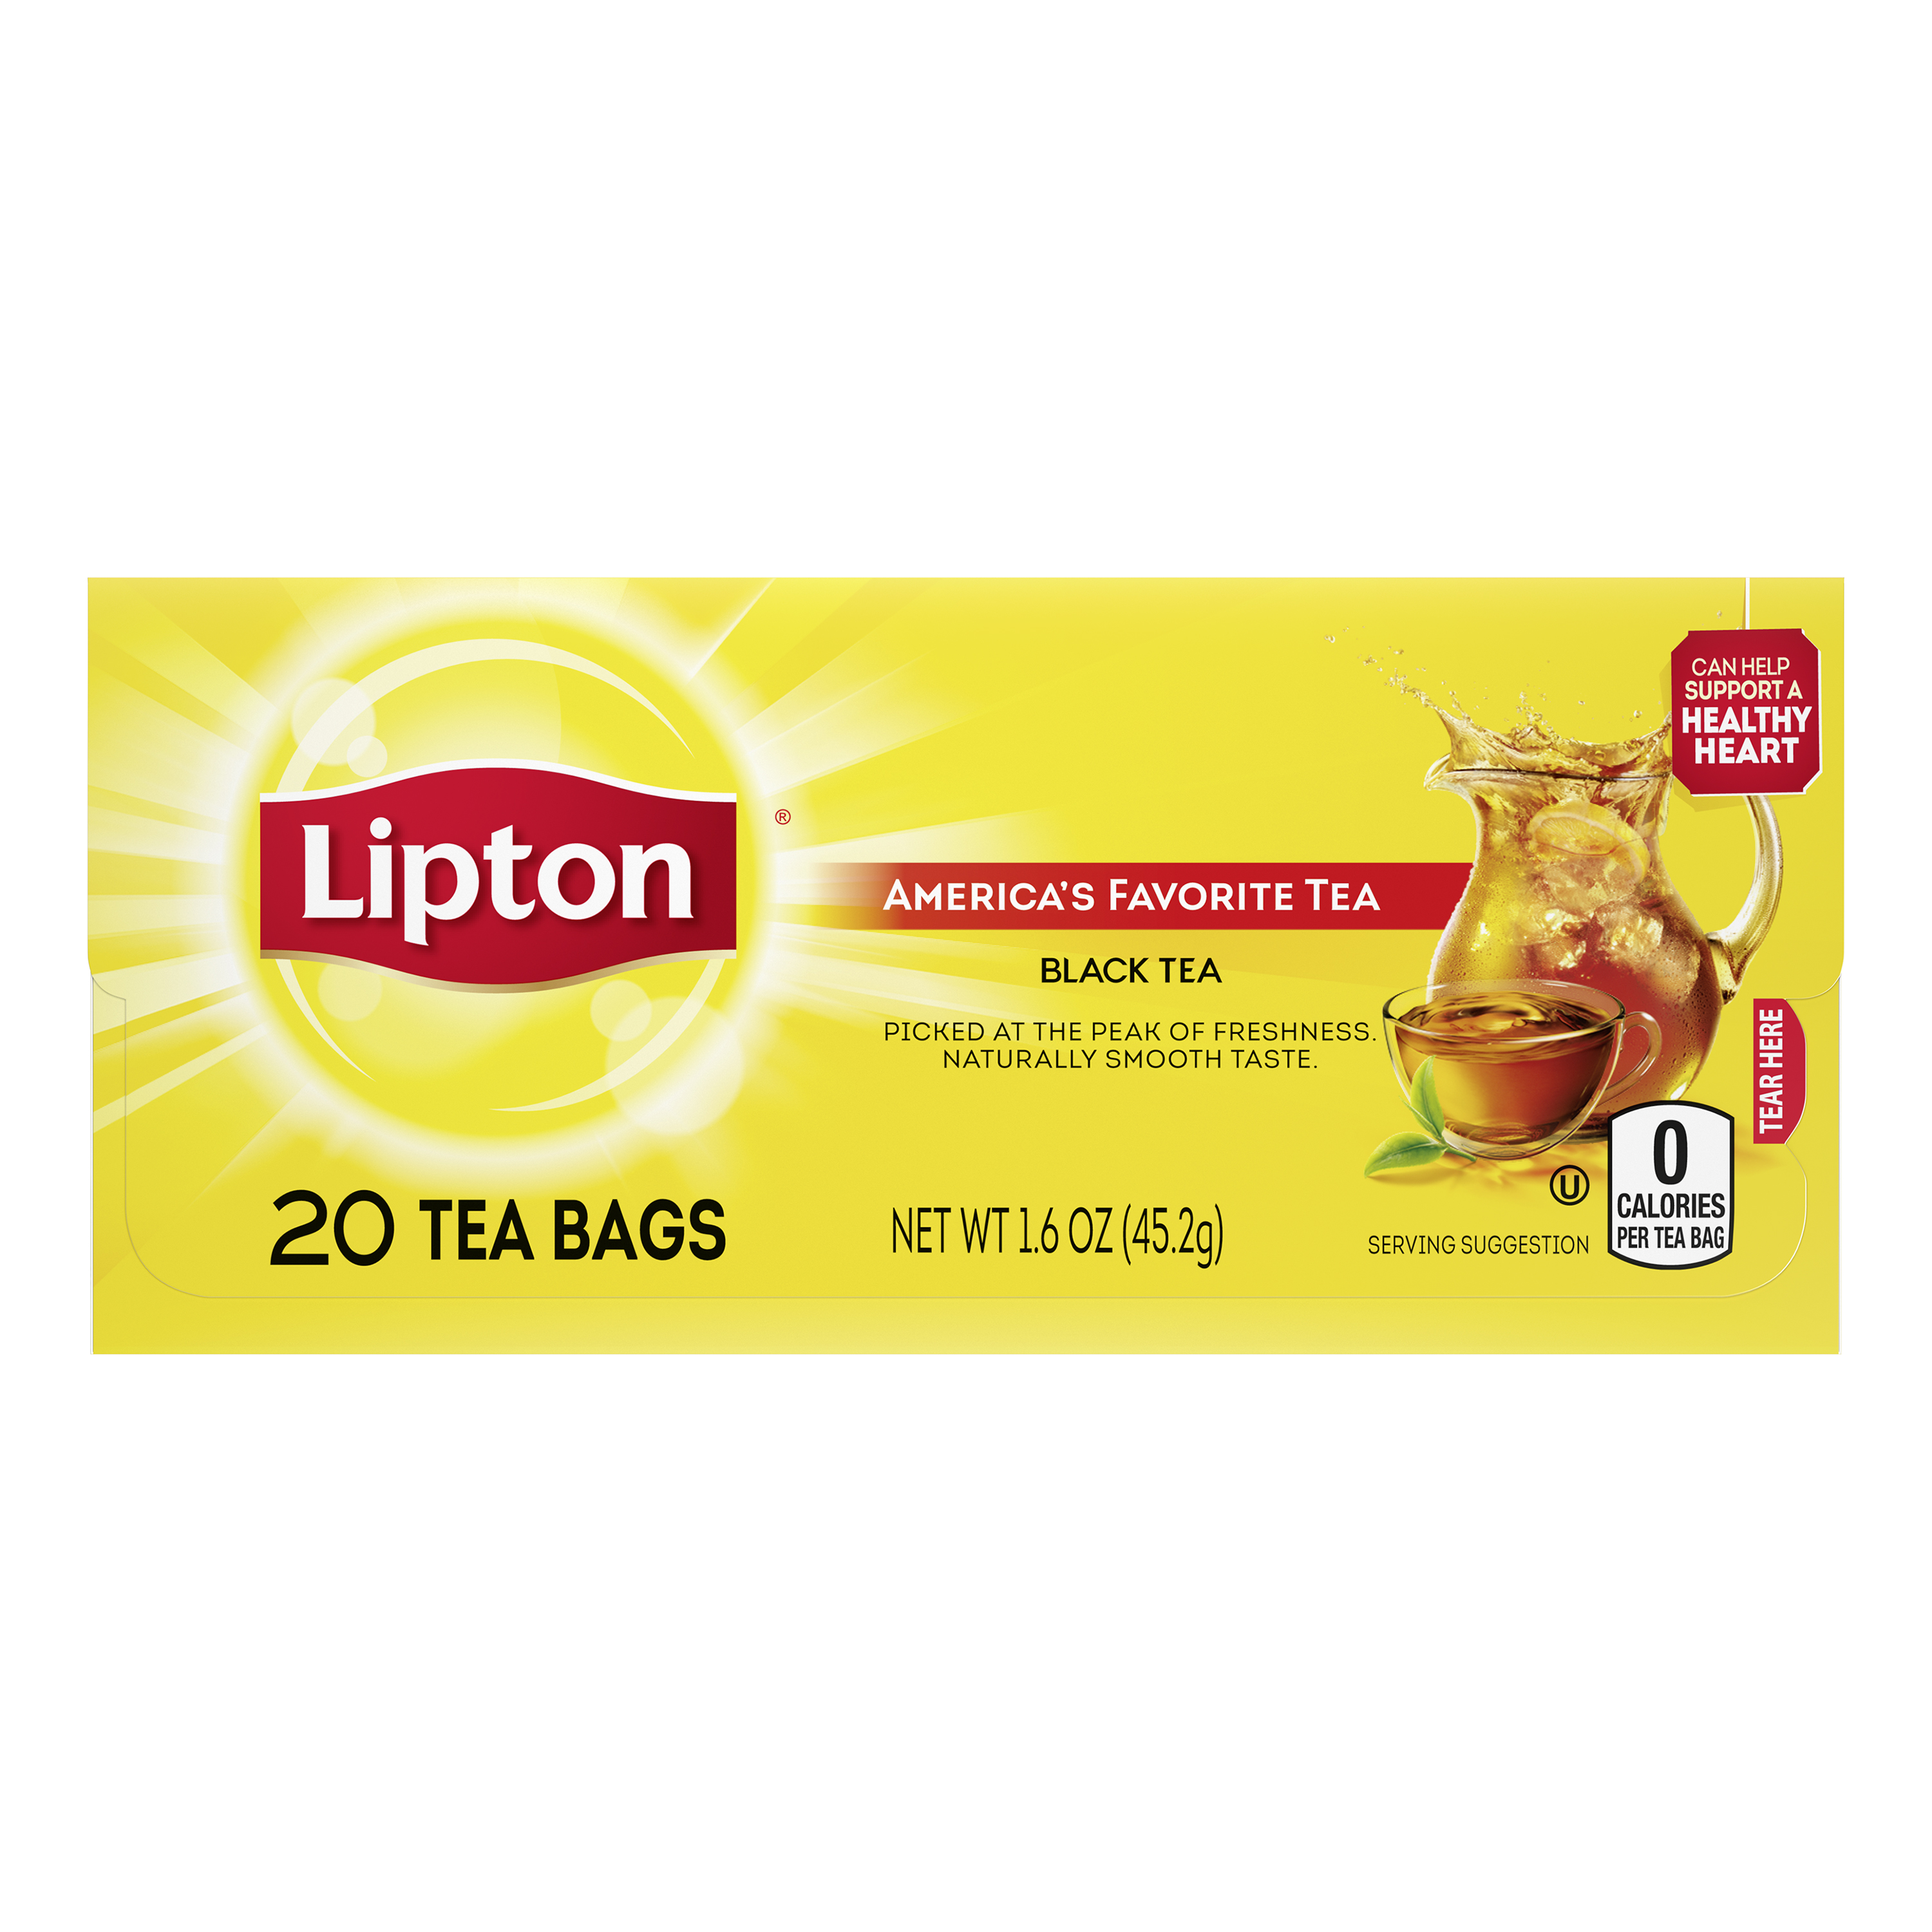 Lipton Black Tea, Can Help Support a Healthy Heart, Tea Bags 20 Count Box - image 1 of 7